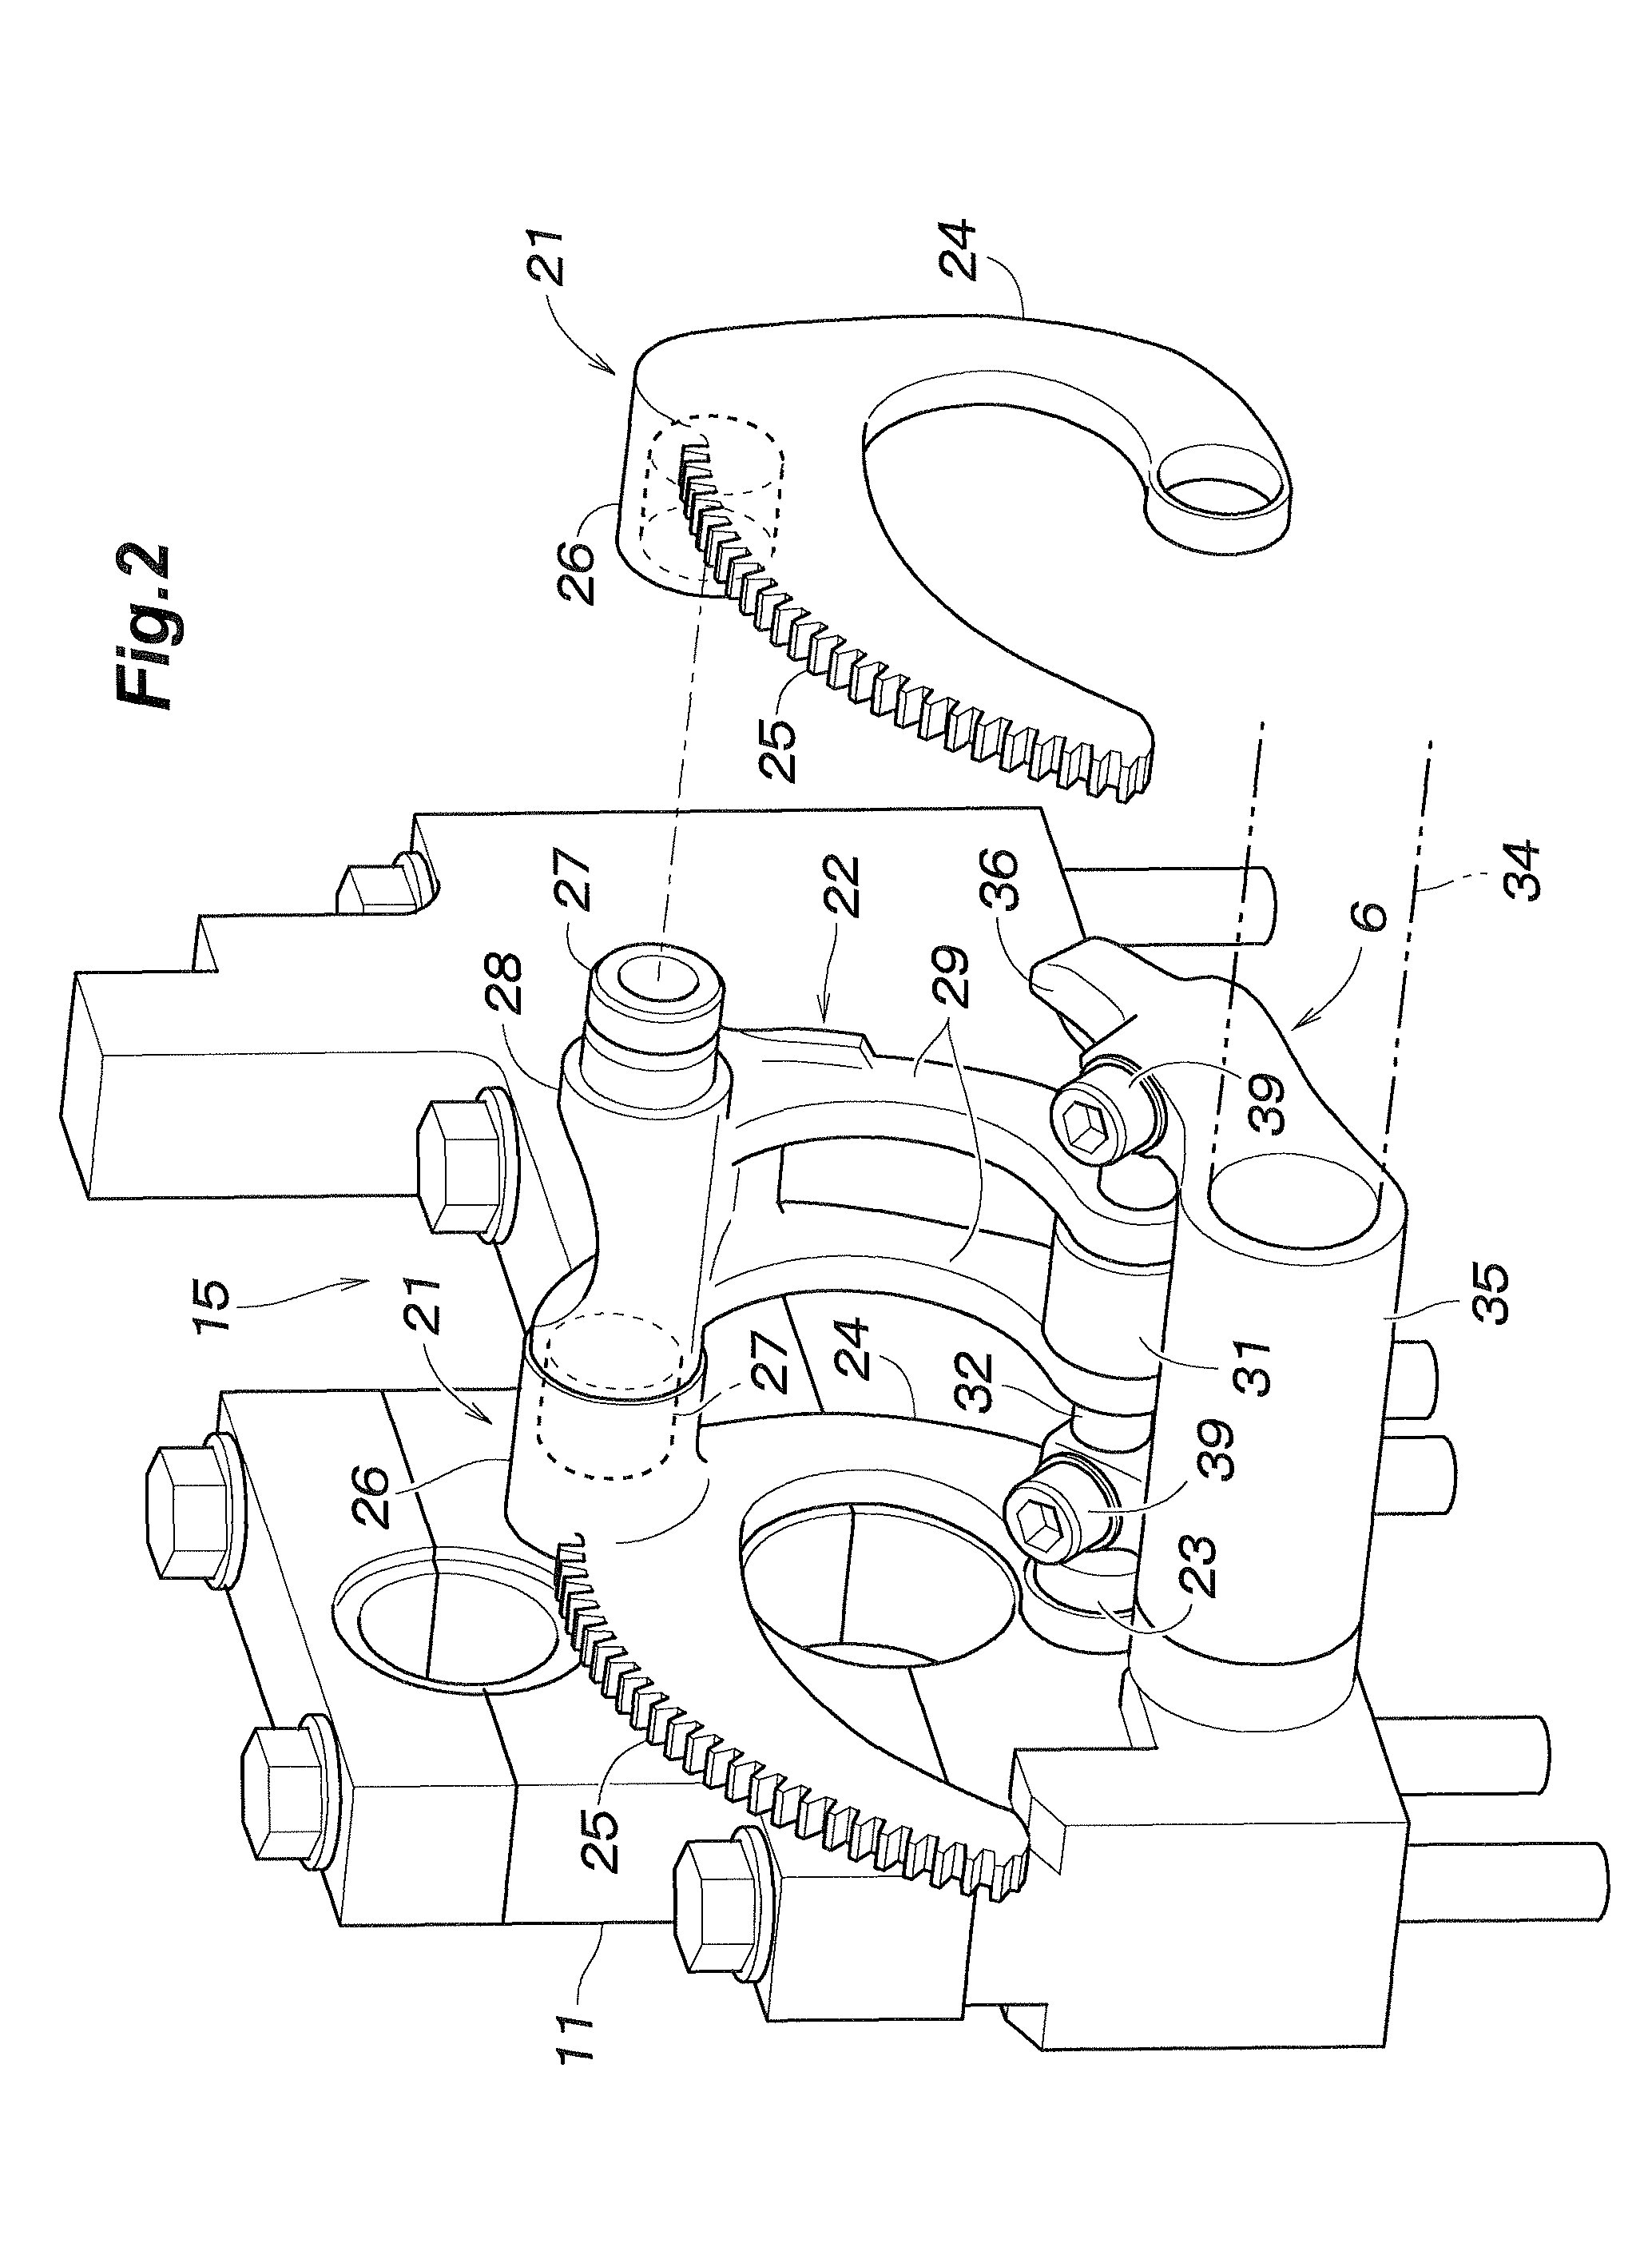 Variable valve opening property internal combustion engine